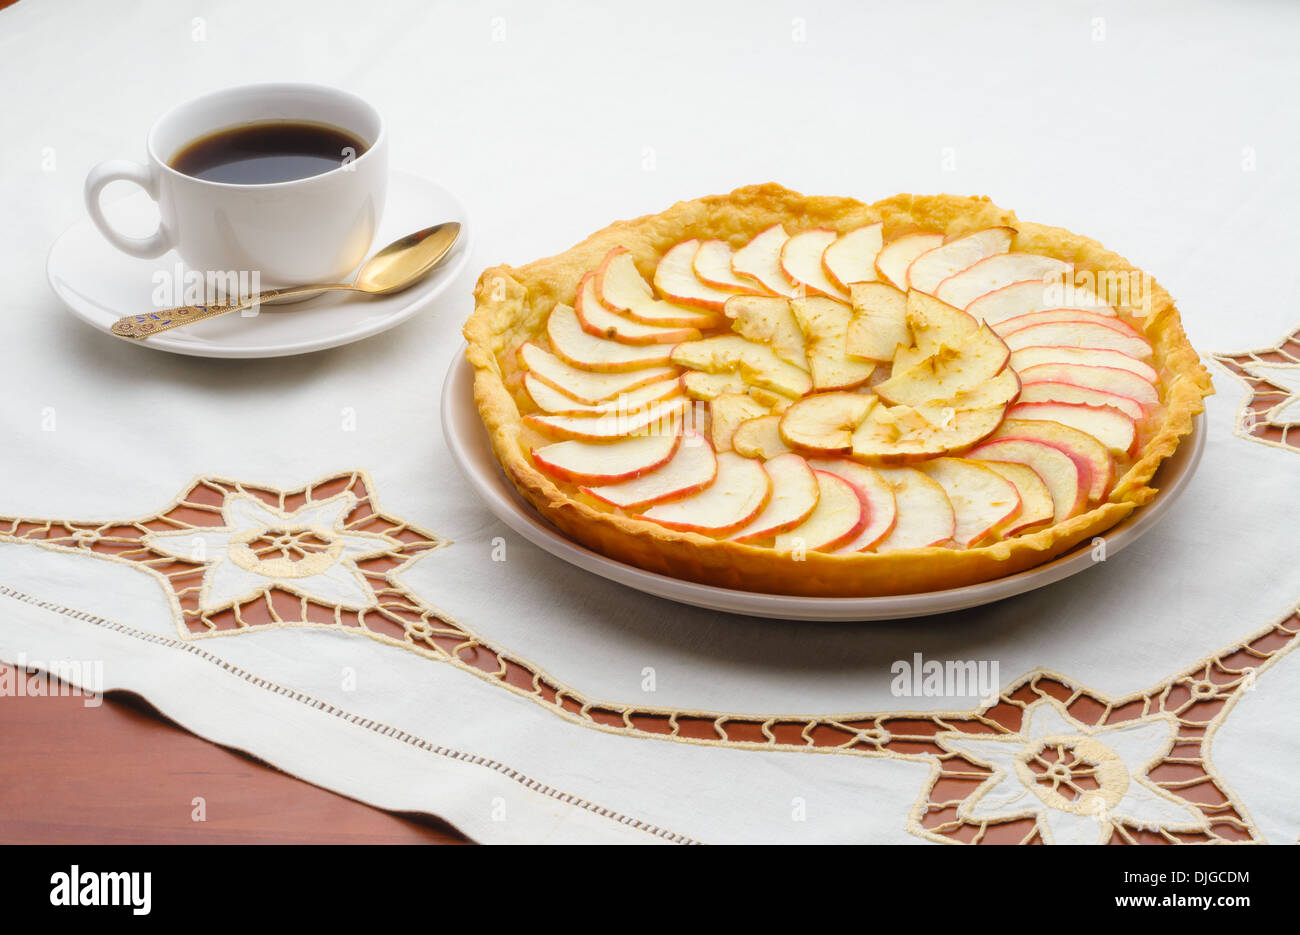 A tasty golden homemade apple tart and a cup of black coffee on an embroidered tablecloth Stock Photo